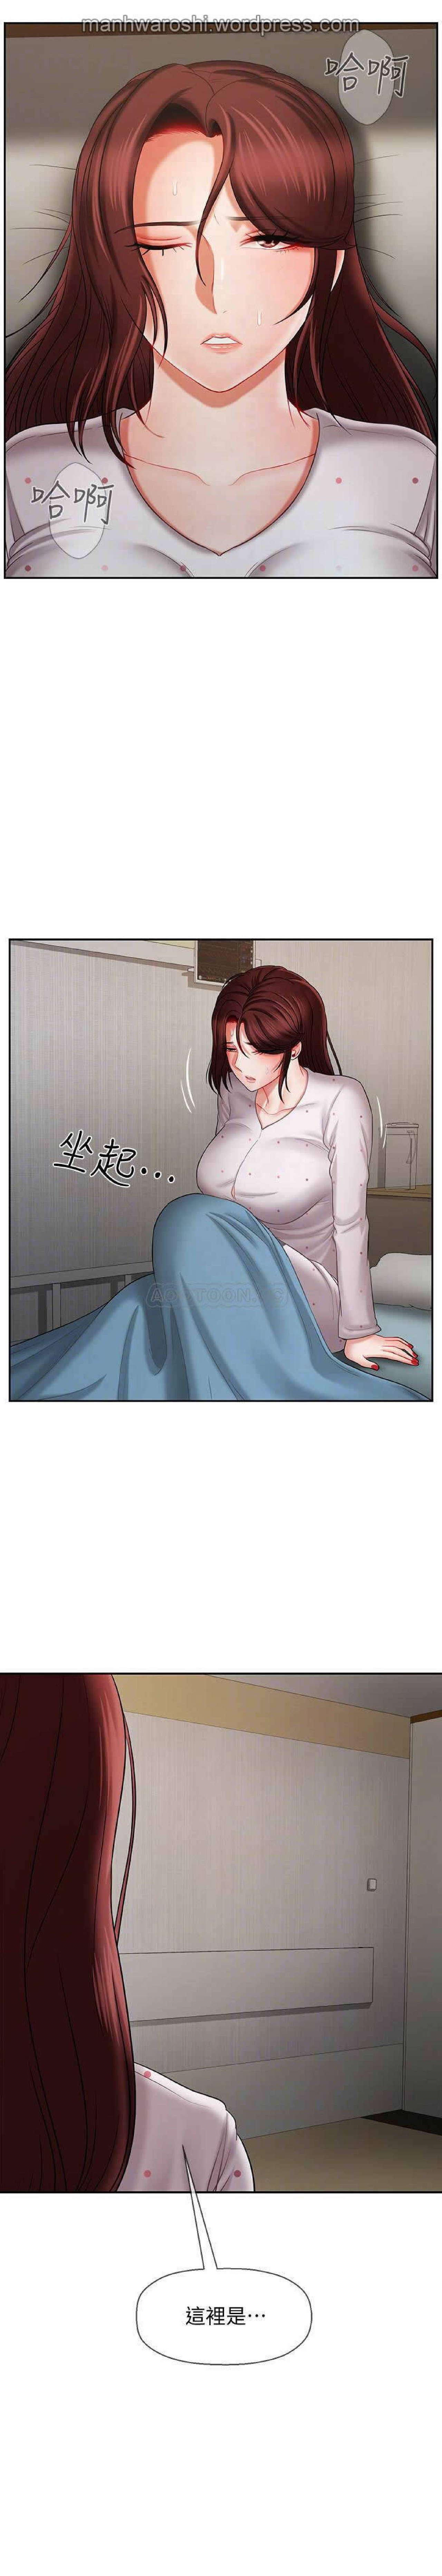 Doggy Style Porn 坏老师 | PHYSICAL CLASSROOM 12 [Chinese] Manhwa Freaky - Page 12